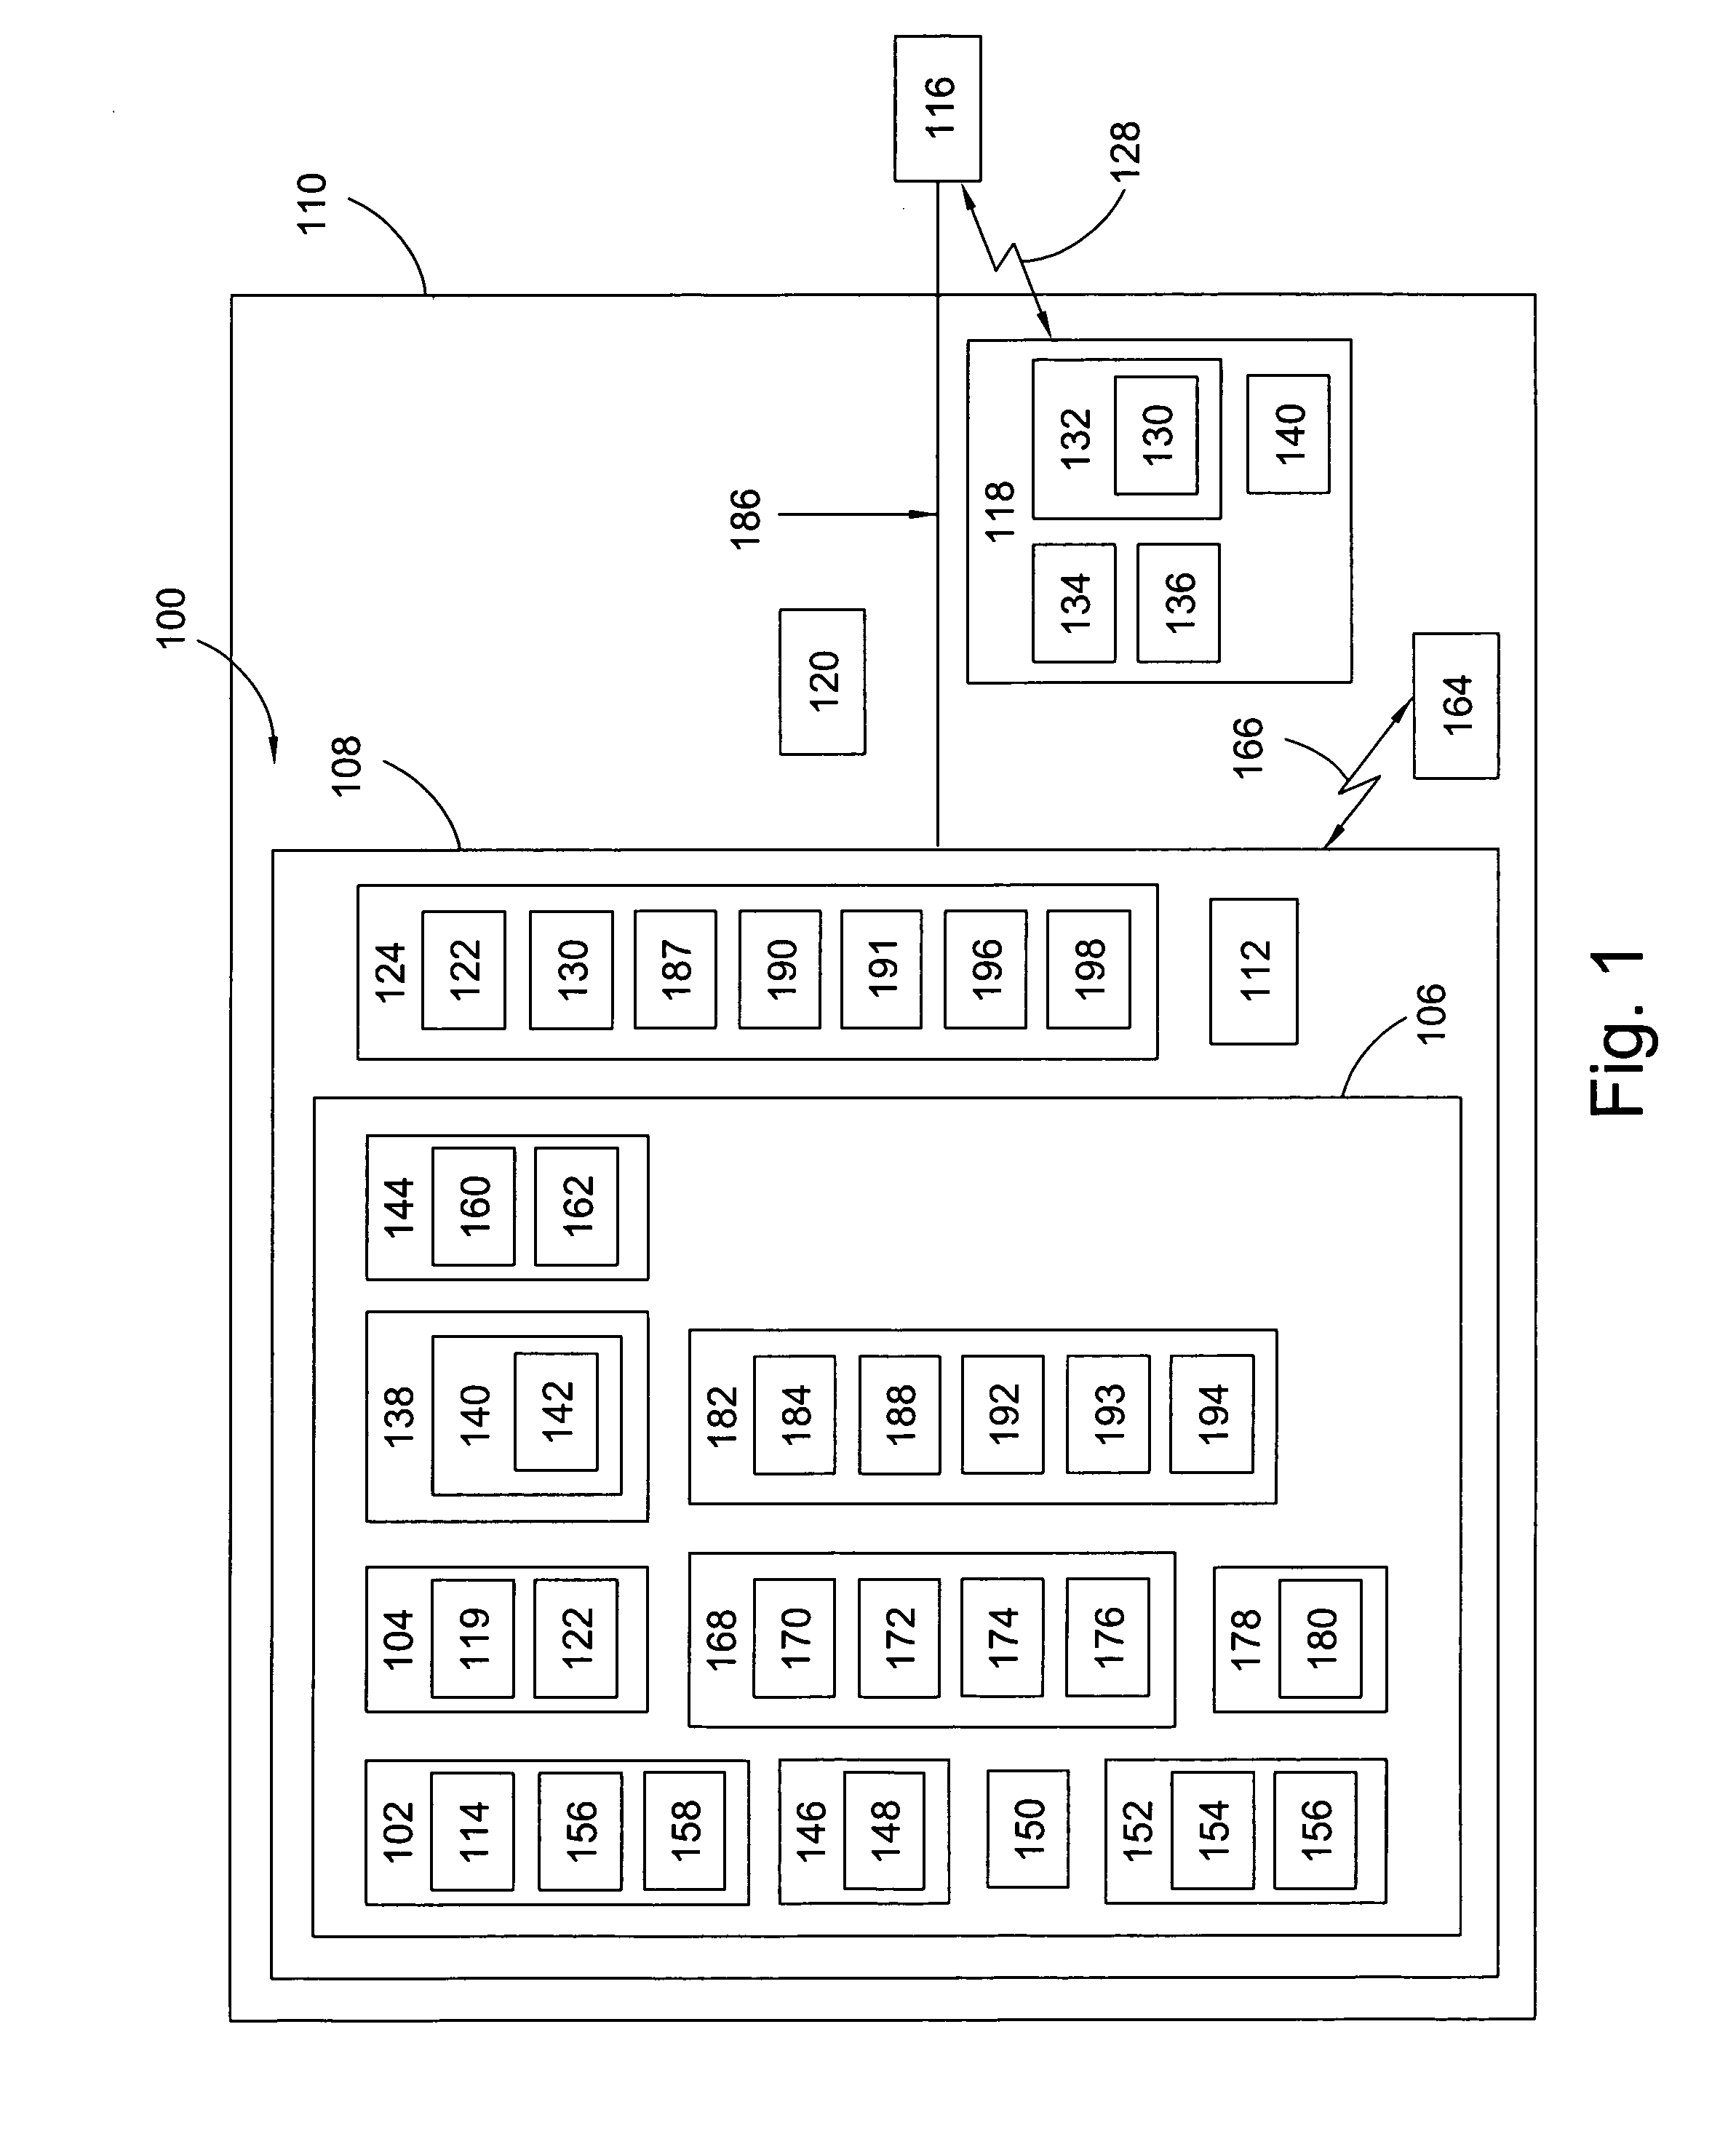 System and method for enabling point of sale functionality in a wireless communications device